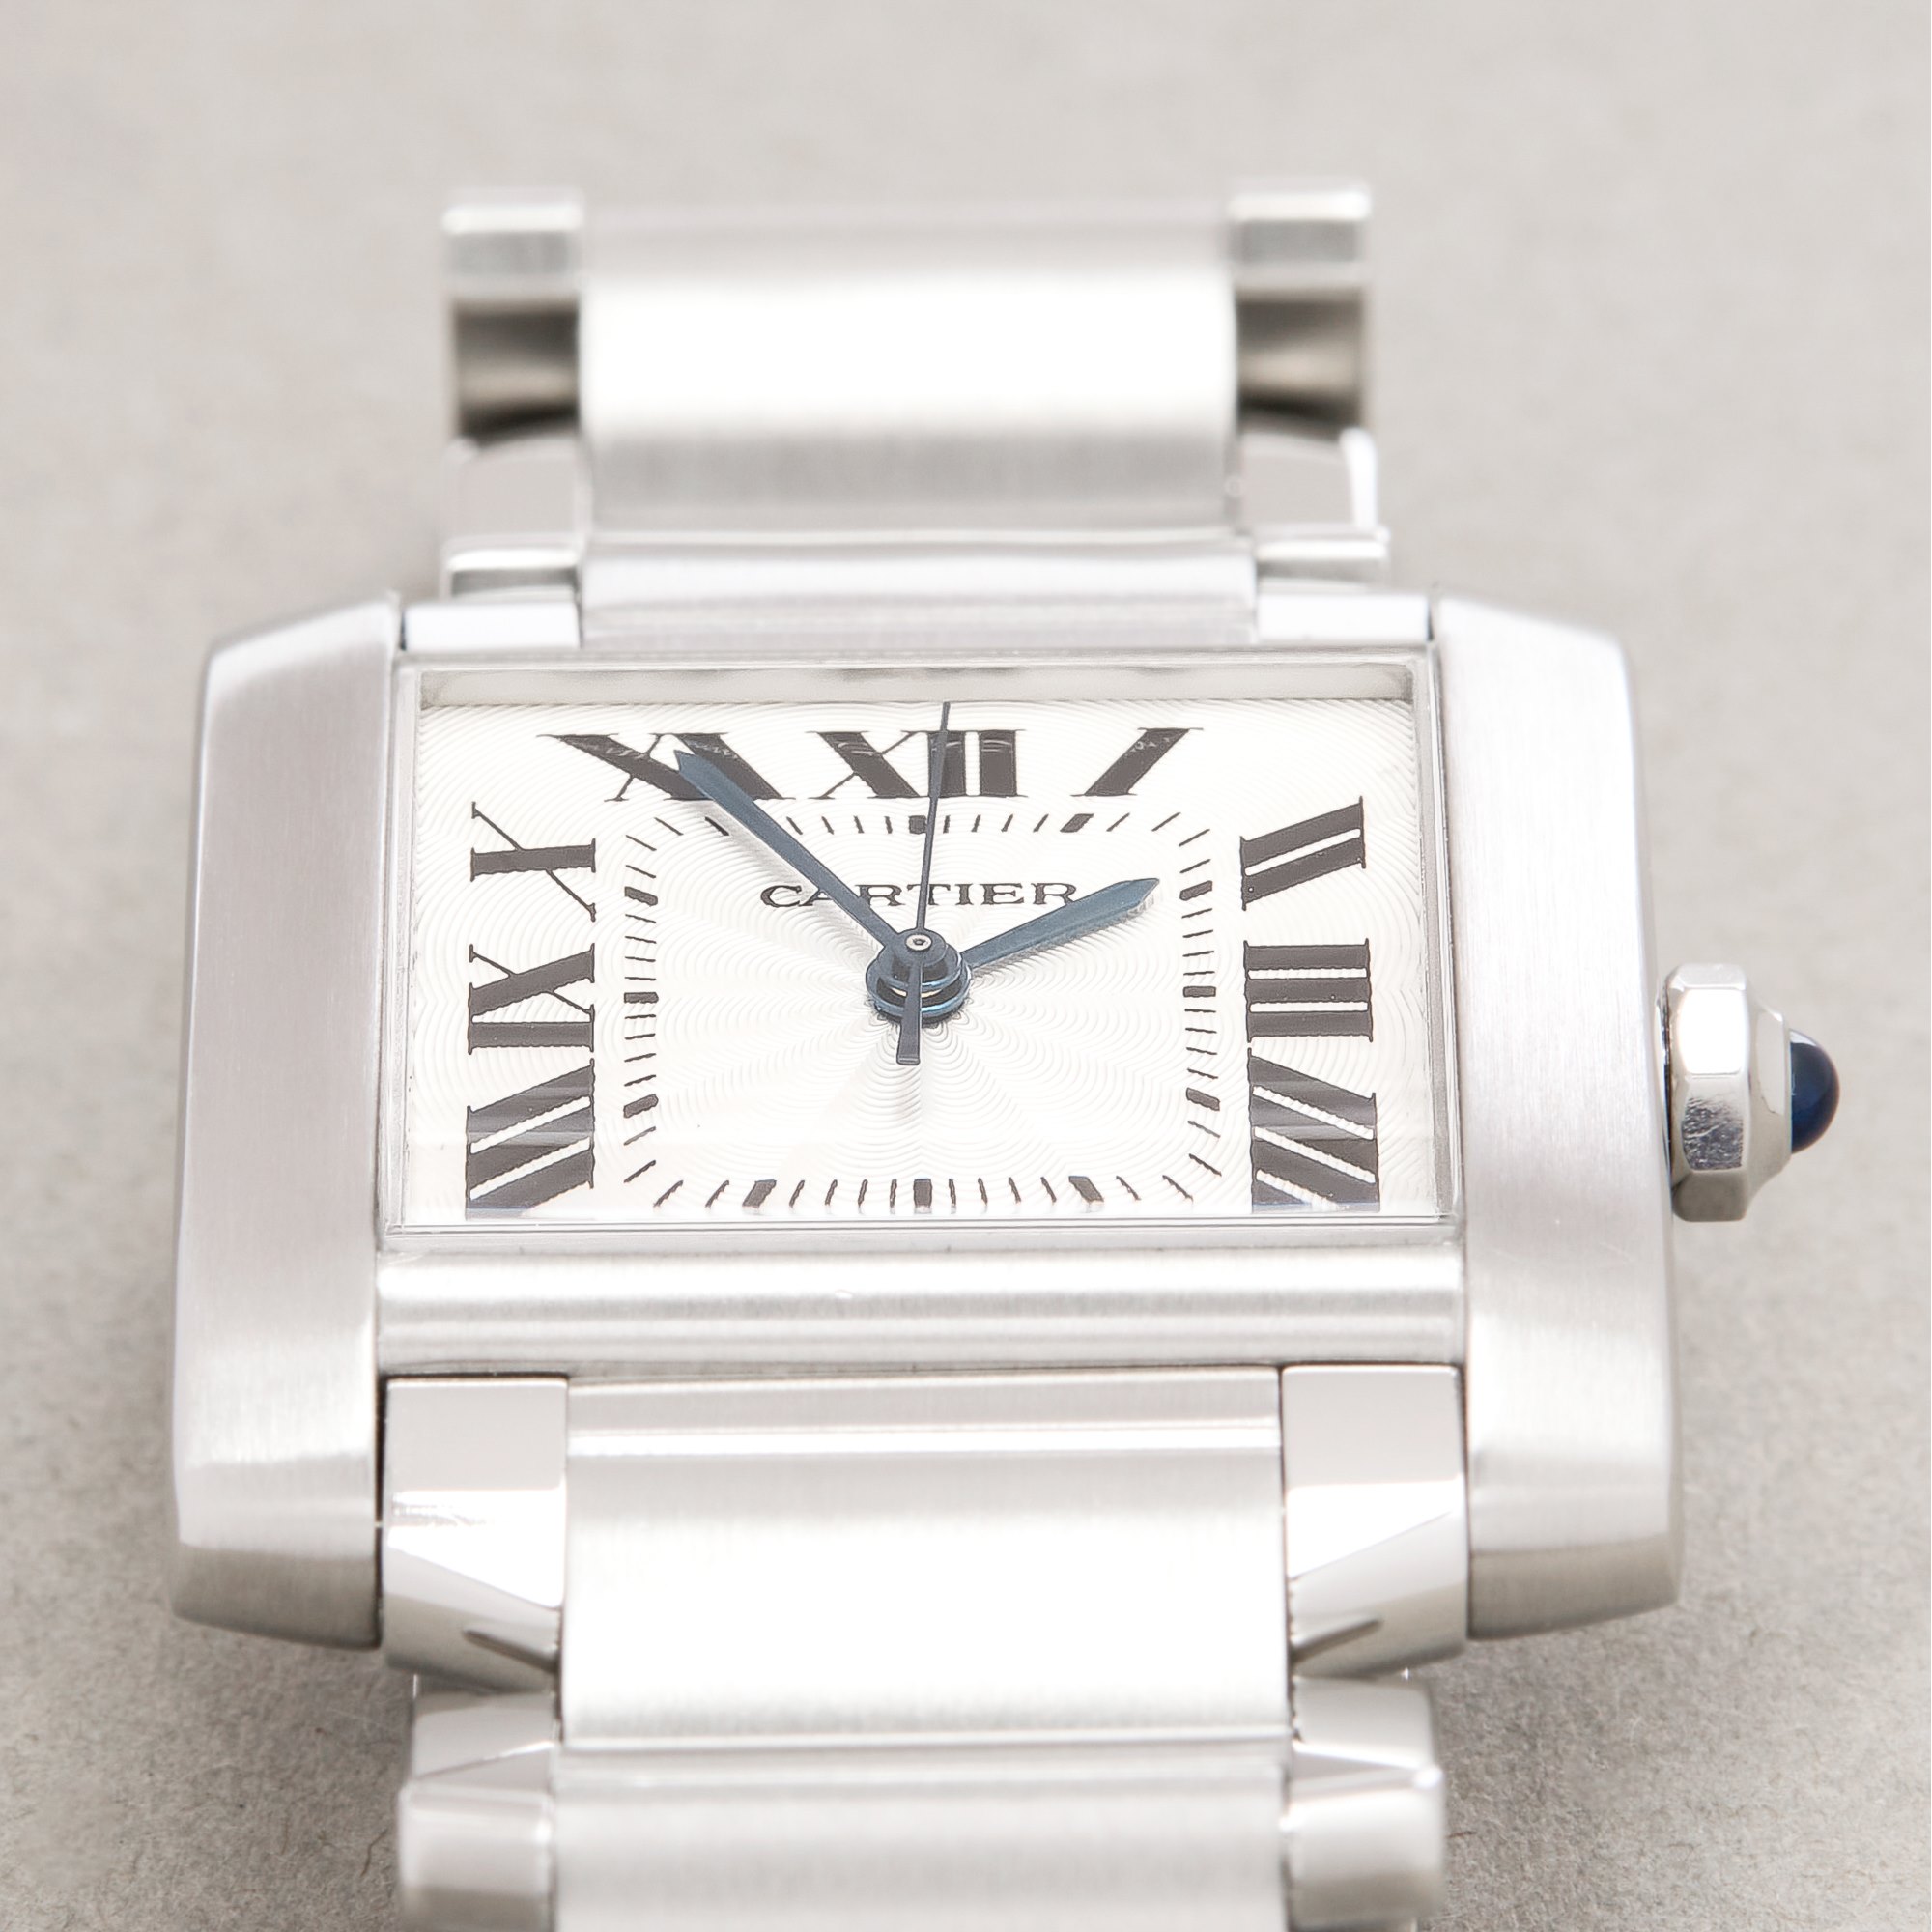 Cartier Tank Francaise Stainless Steel W51002Q3 or 2302